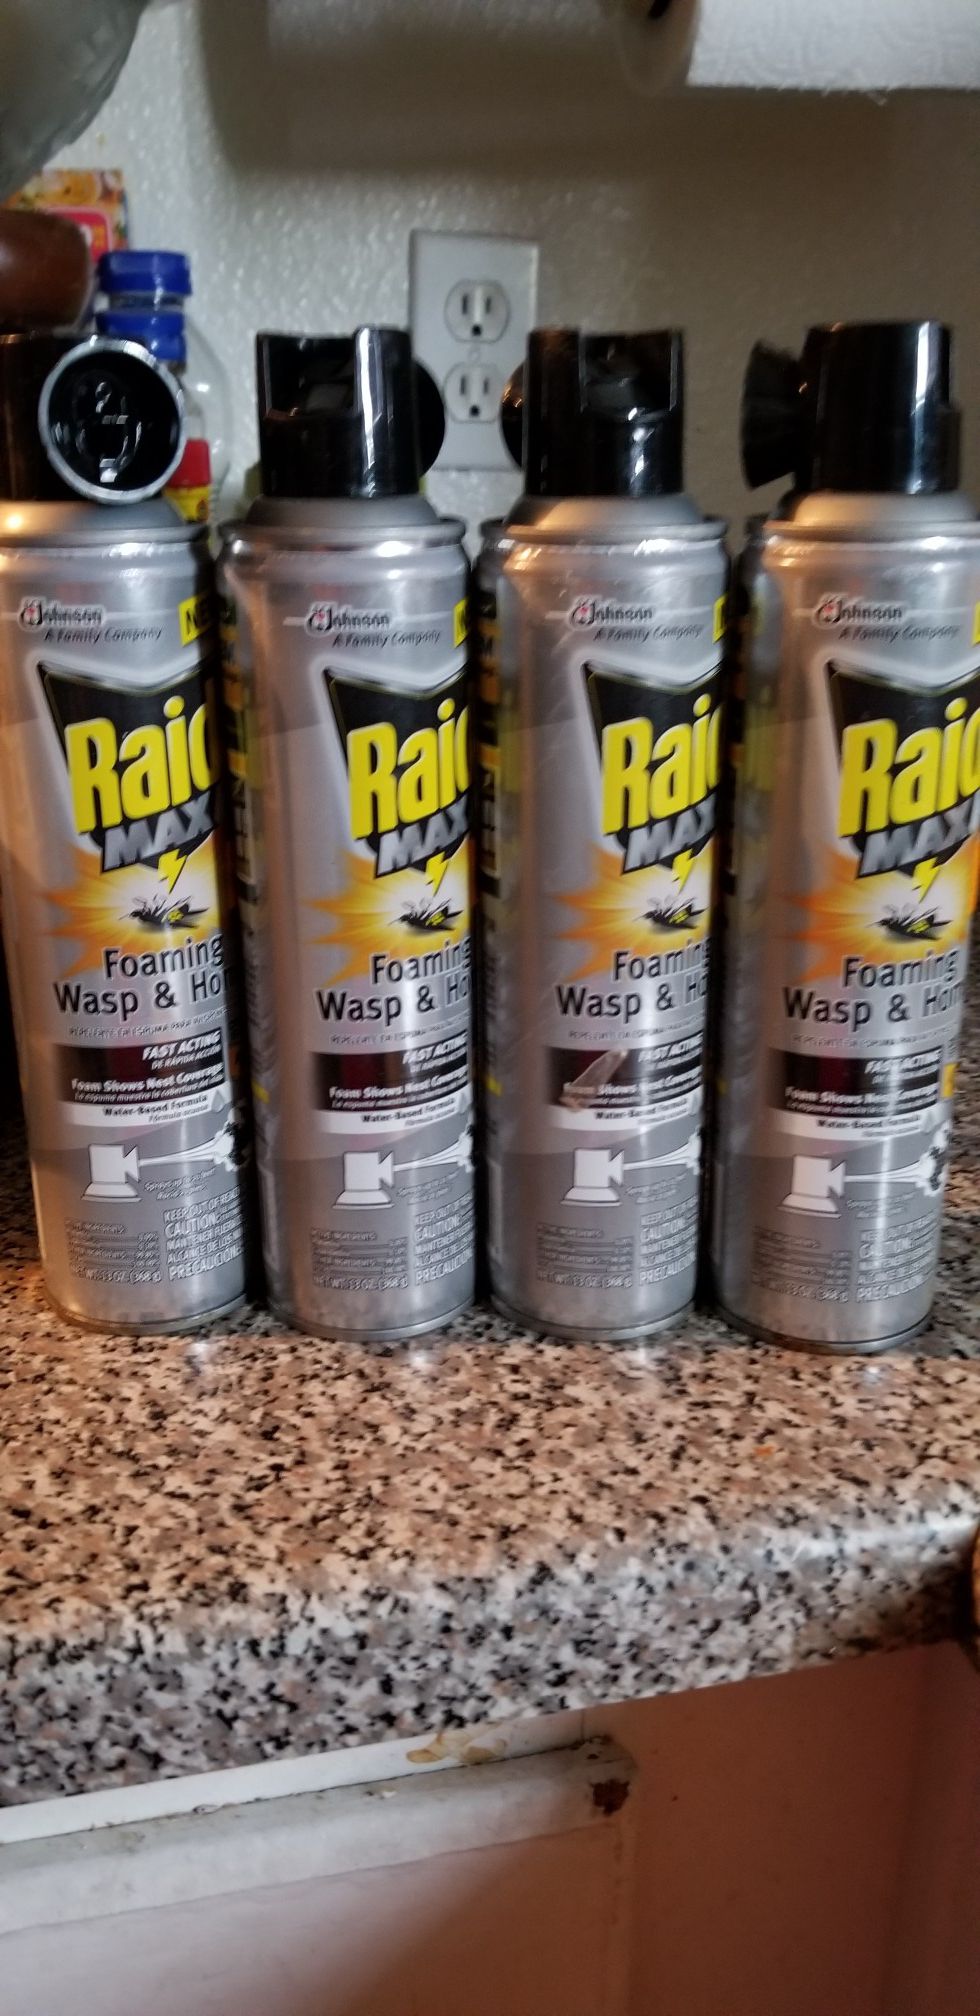 New raid Max foaming wasp and hornet